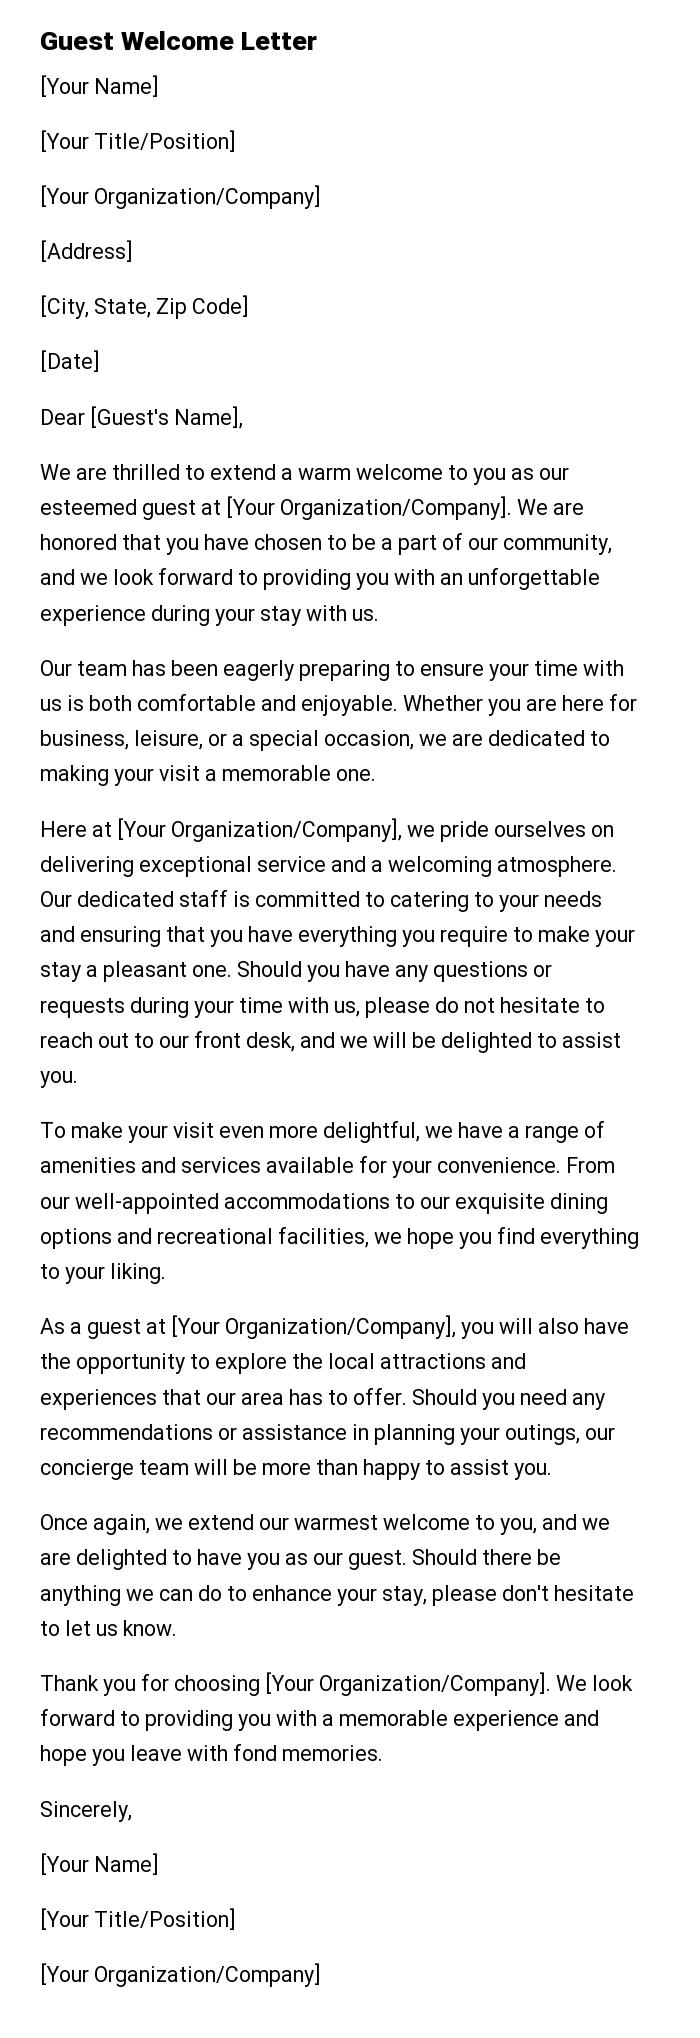 Guest Welcome Letter